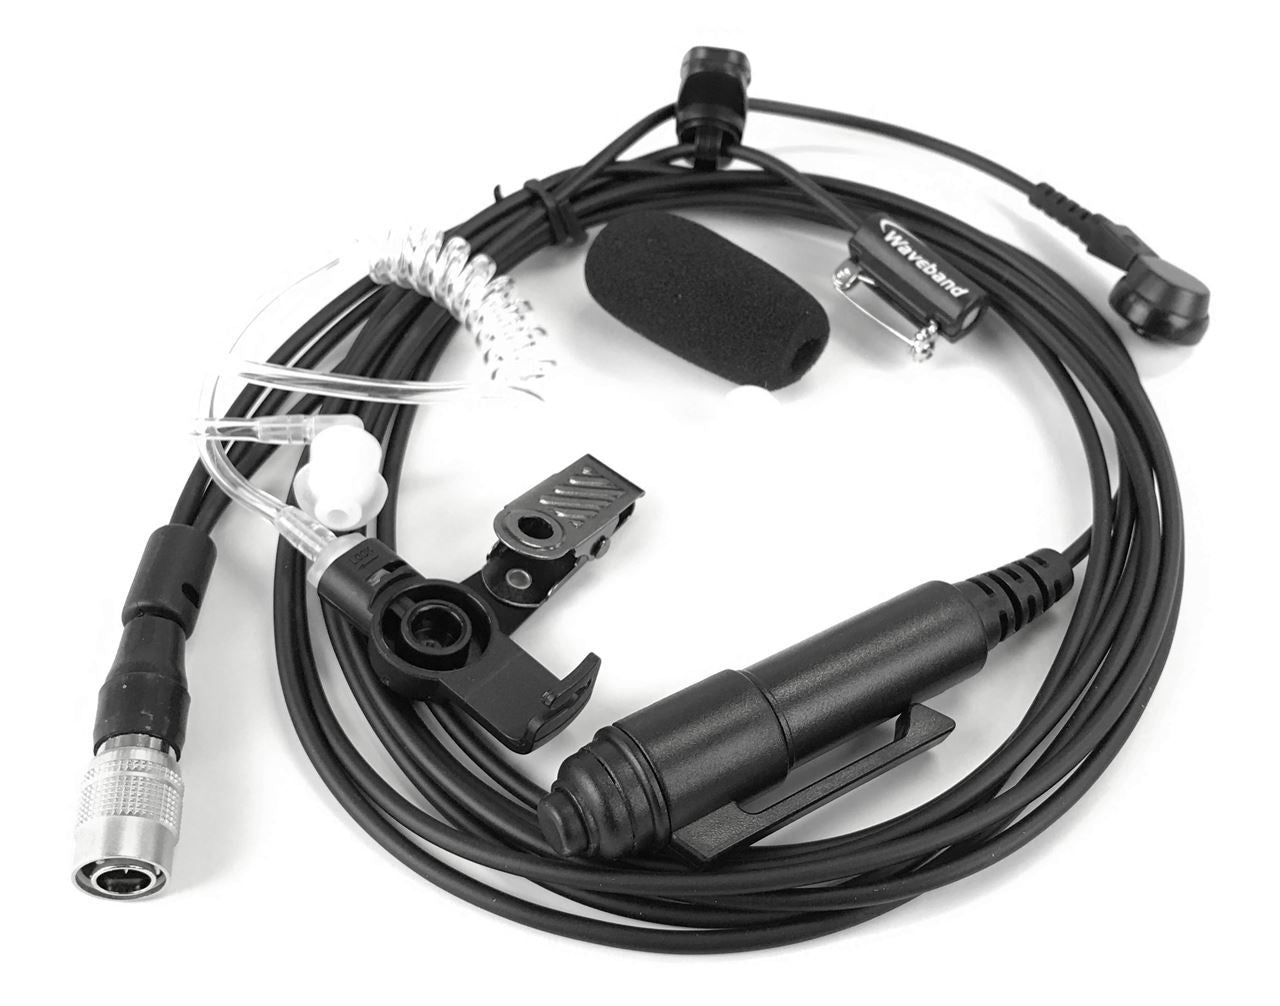 Comparable KHS-12 3 wire mini lapel mic with earphone for use with the Kenwood TK2180 Portable Radio - Waveband Communications